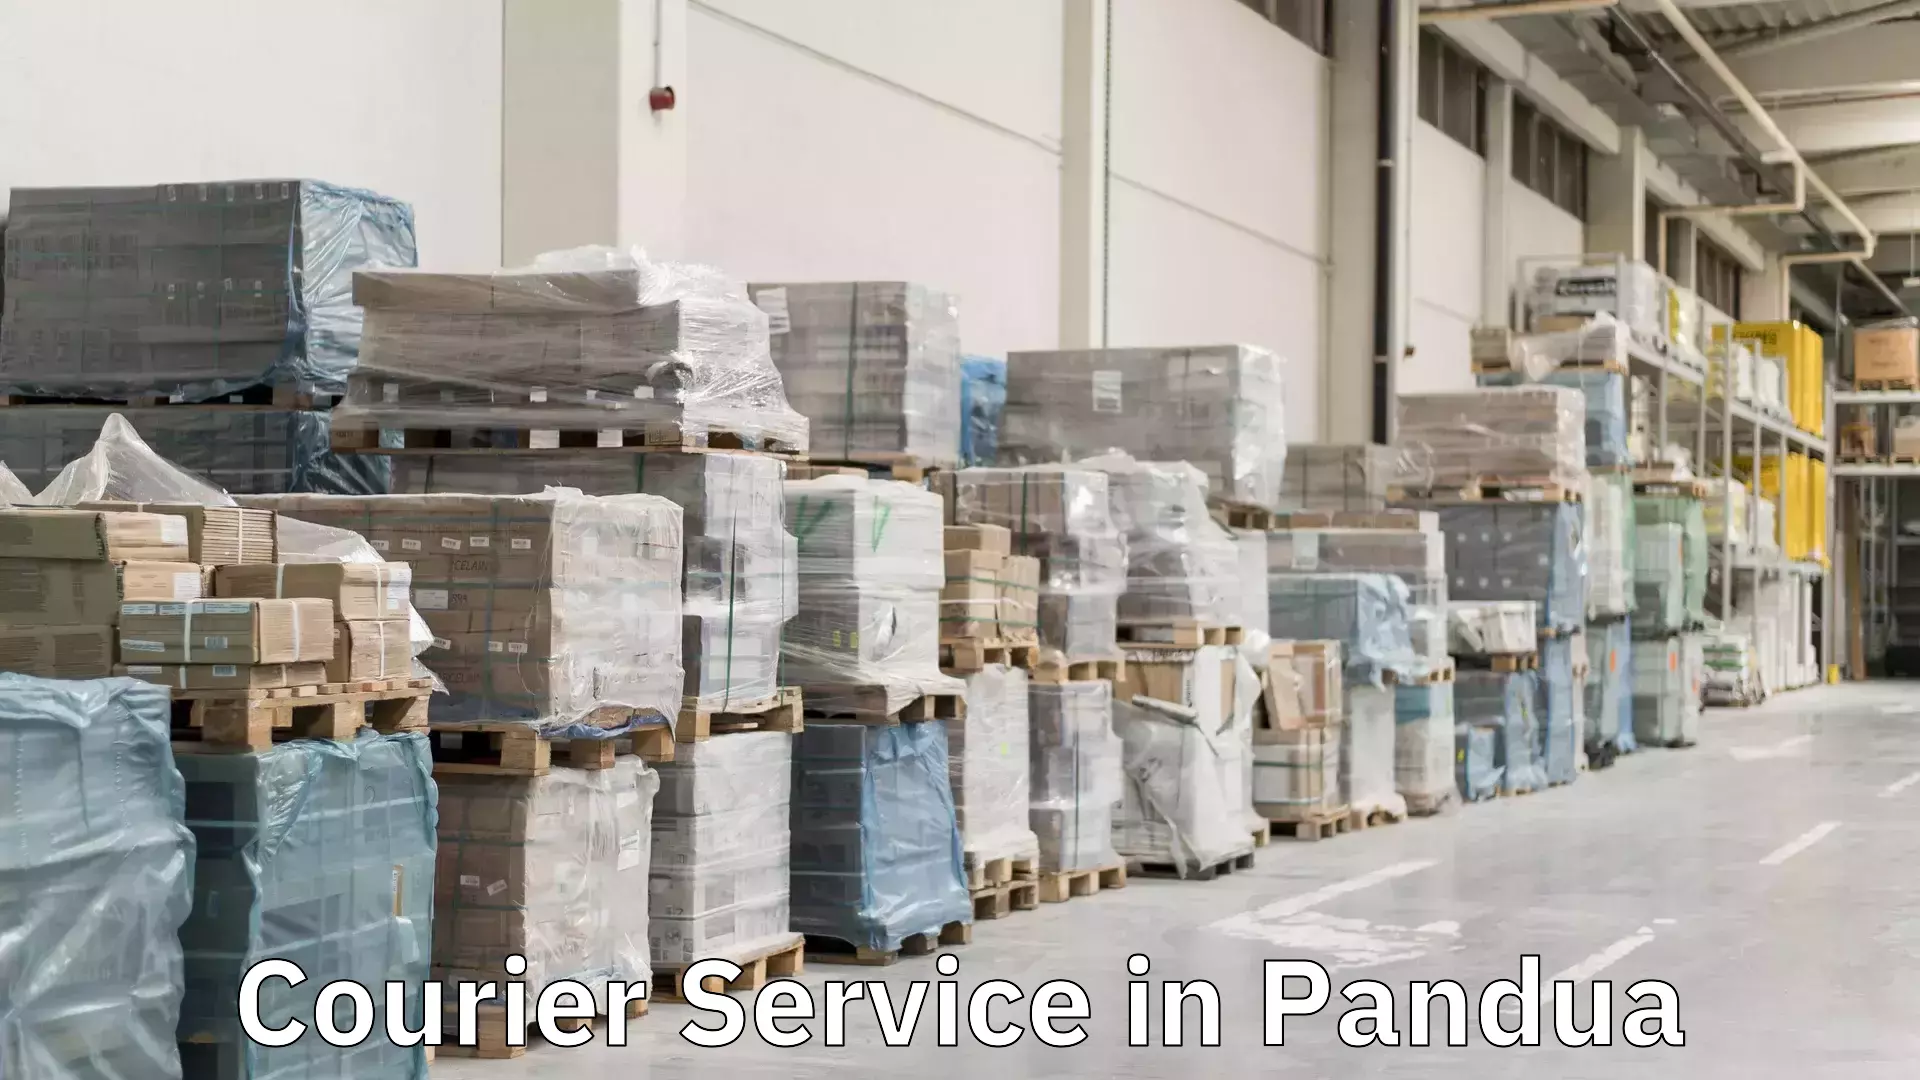 Optimized shipping services in Pandua